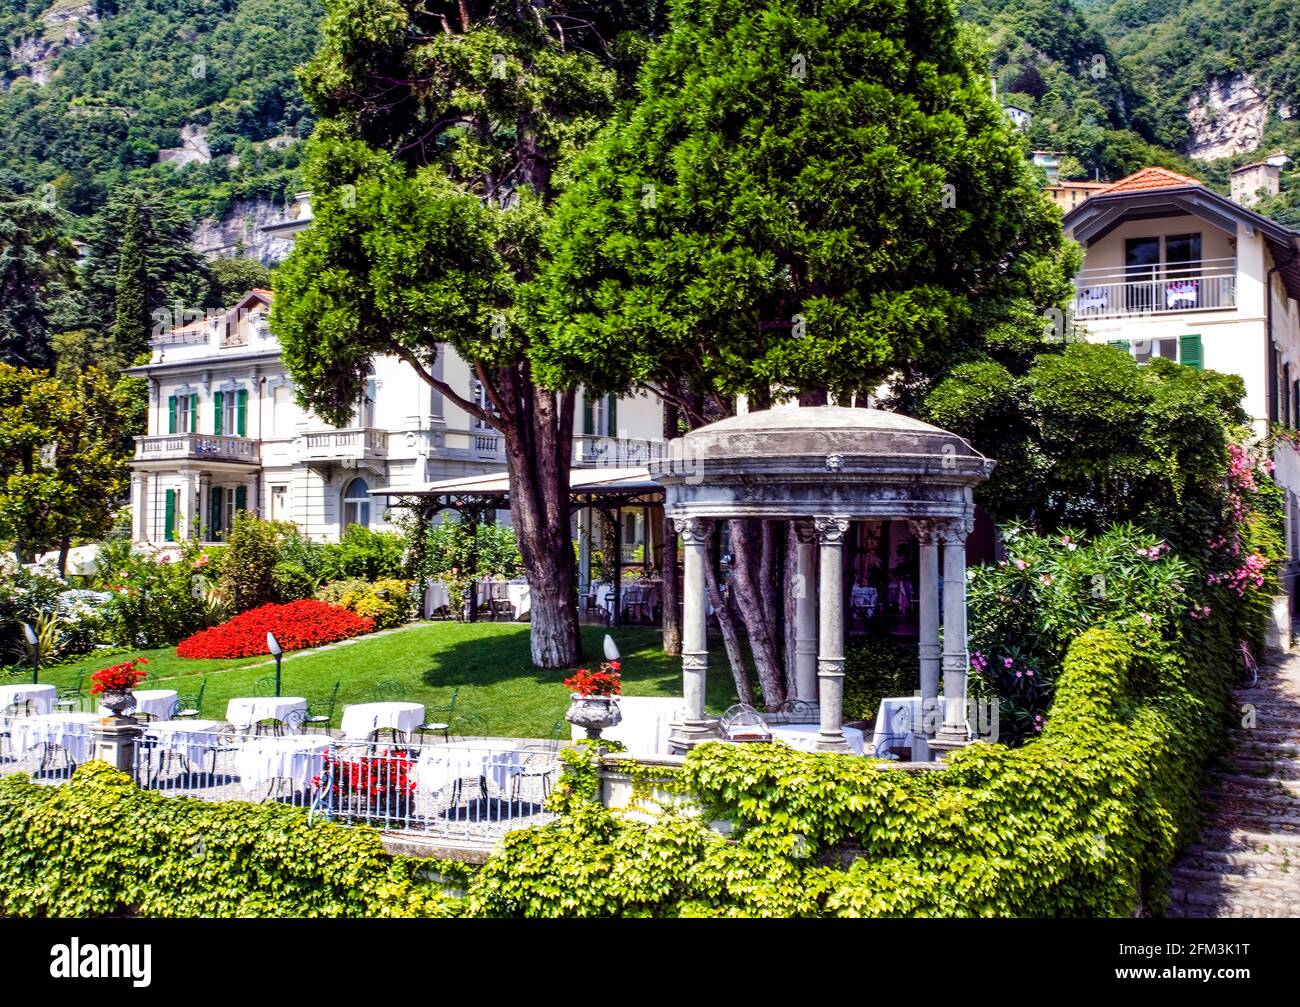 Image of the Ristorante Imperialino that has a breathtaking view on Lake Como in the town of Moltrasio, Italy Stock Photo